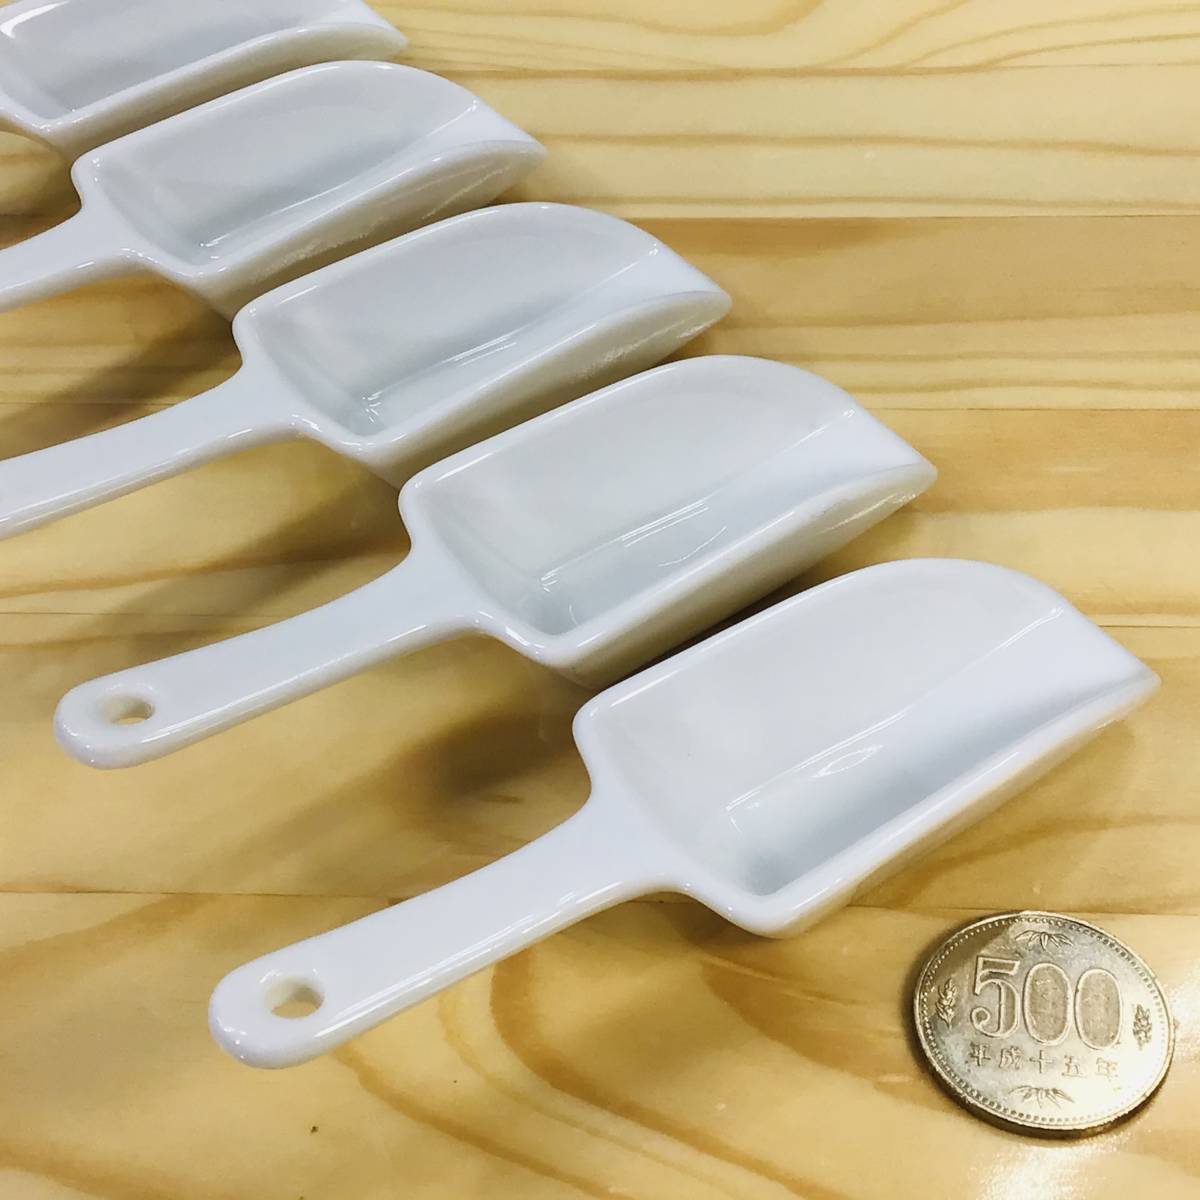 [ Showa Retro * new goods * unused ] very unusual ceramics and porcelain made tapper wear flour scoop, white color, total length approximately 11.5 centimeter width approximately 3.5 centimeter,5 point together 